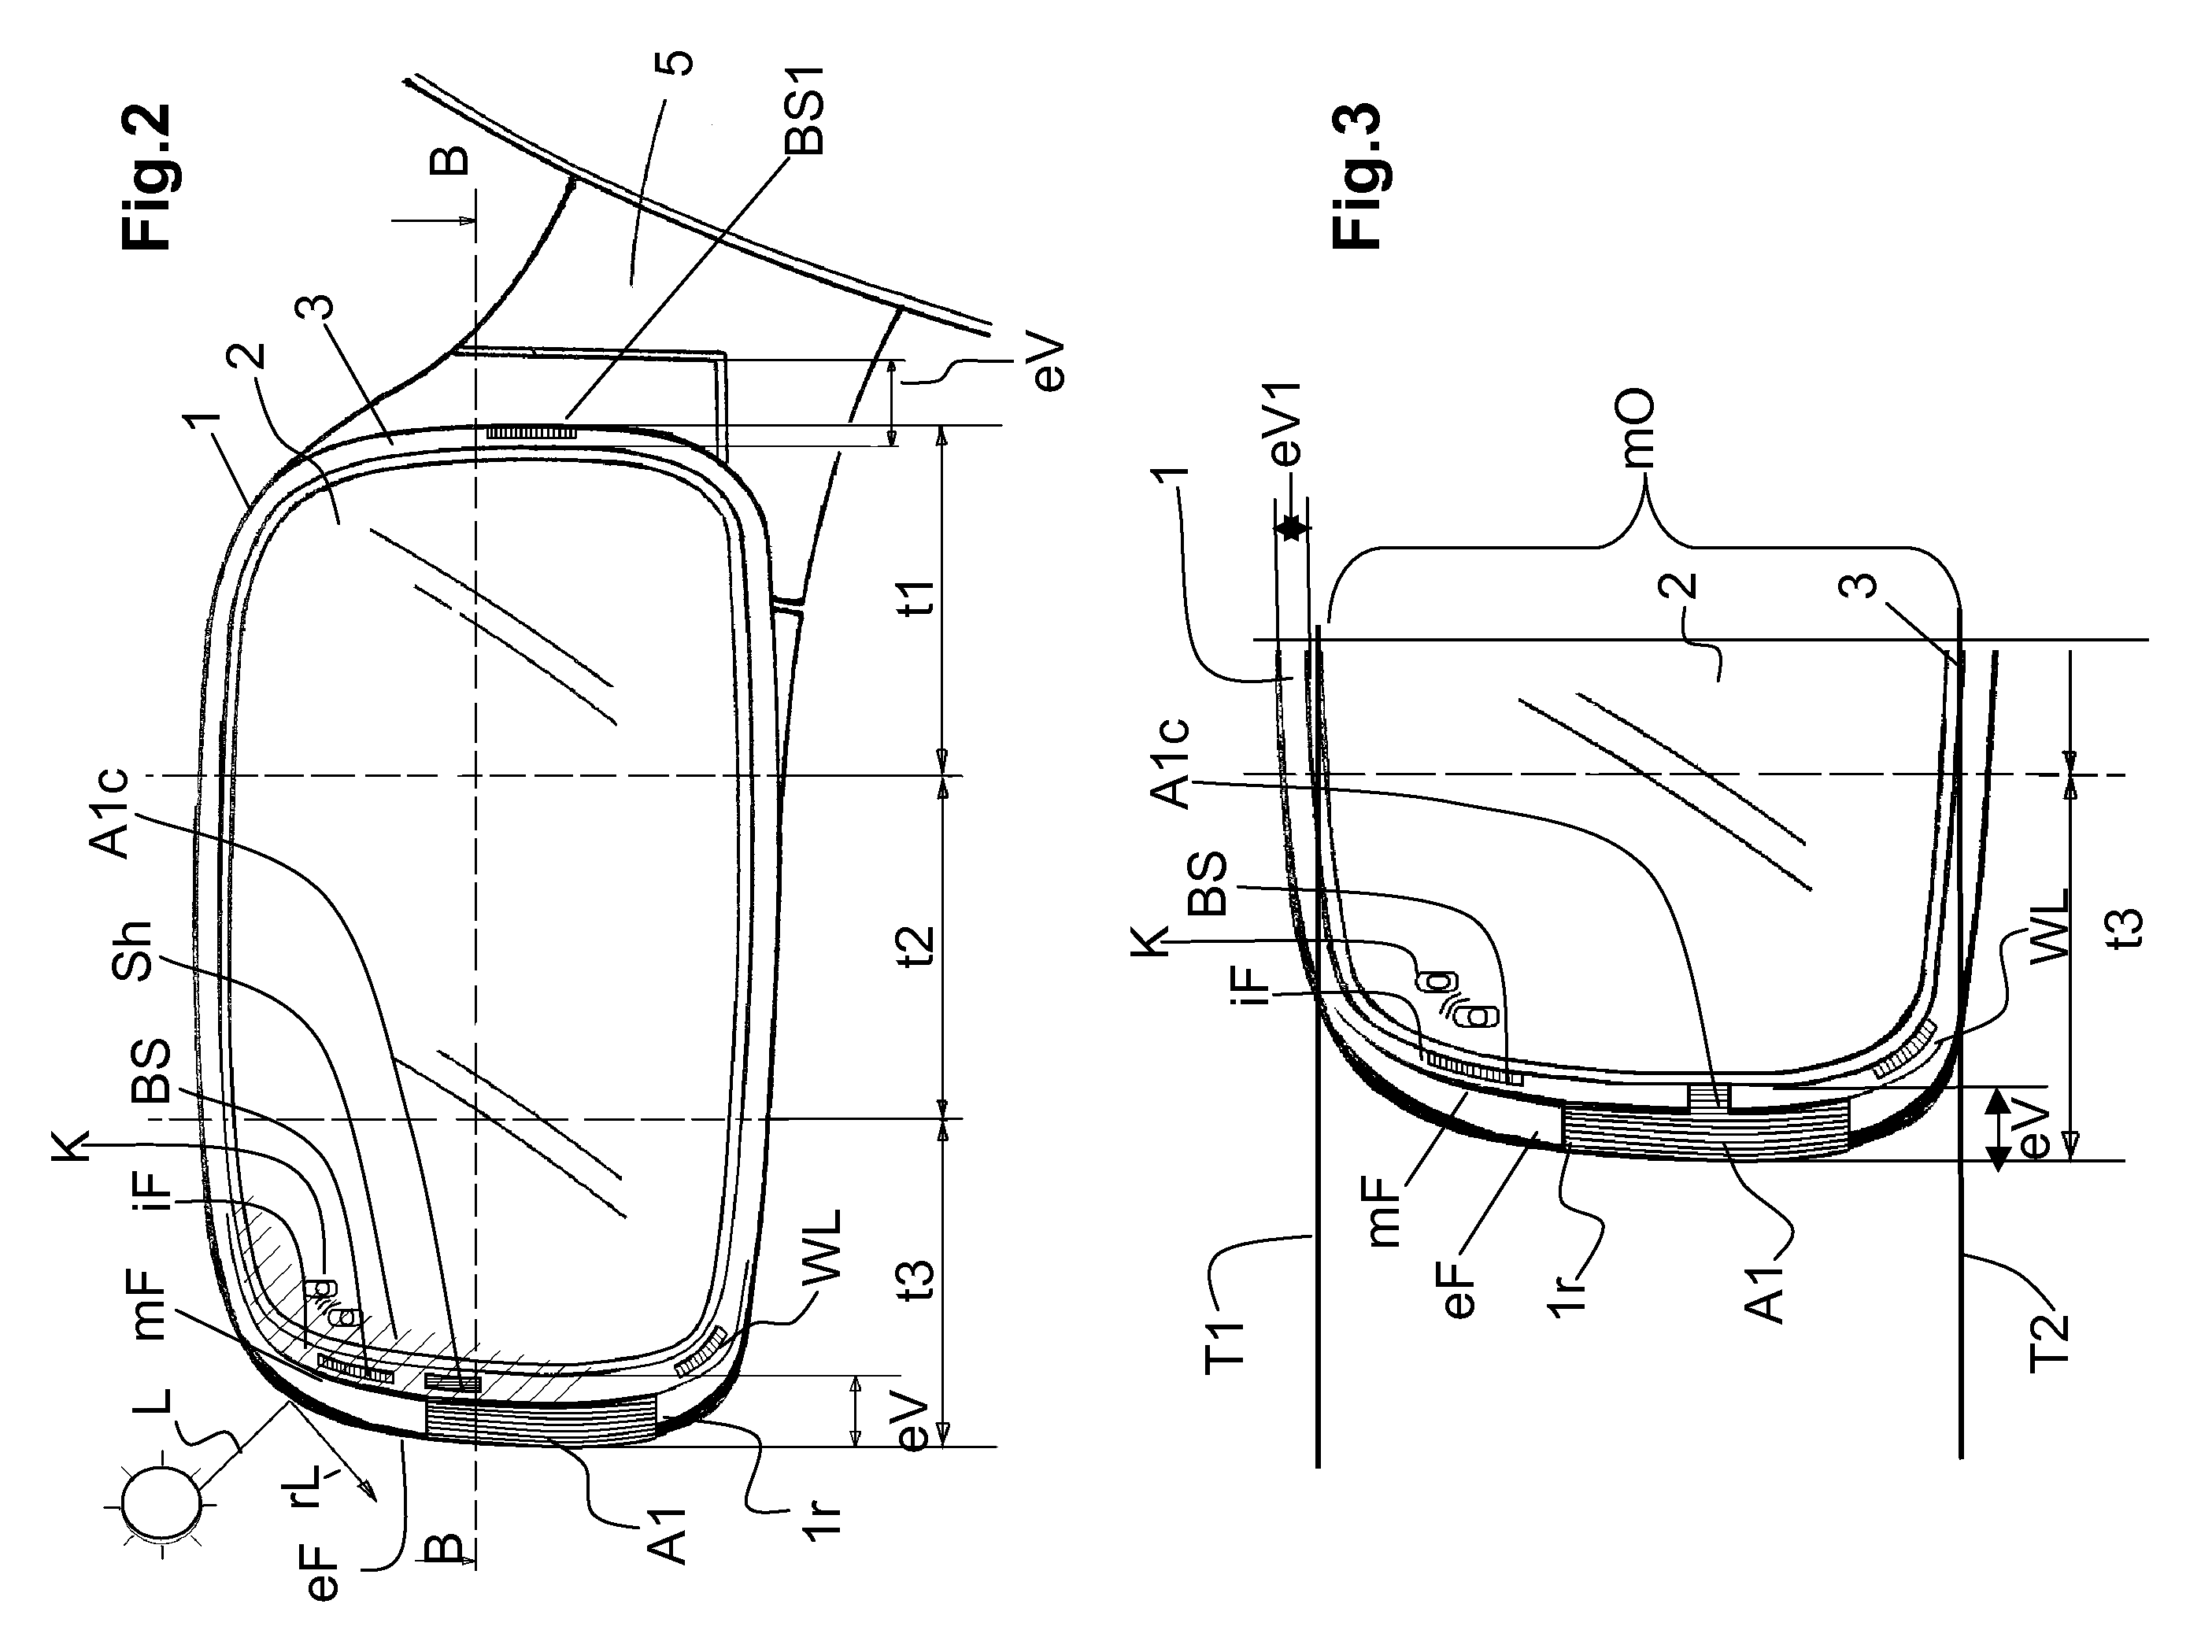 Multi-purpose external rear-view mirror unit for vehicles